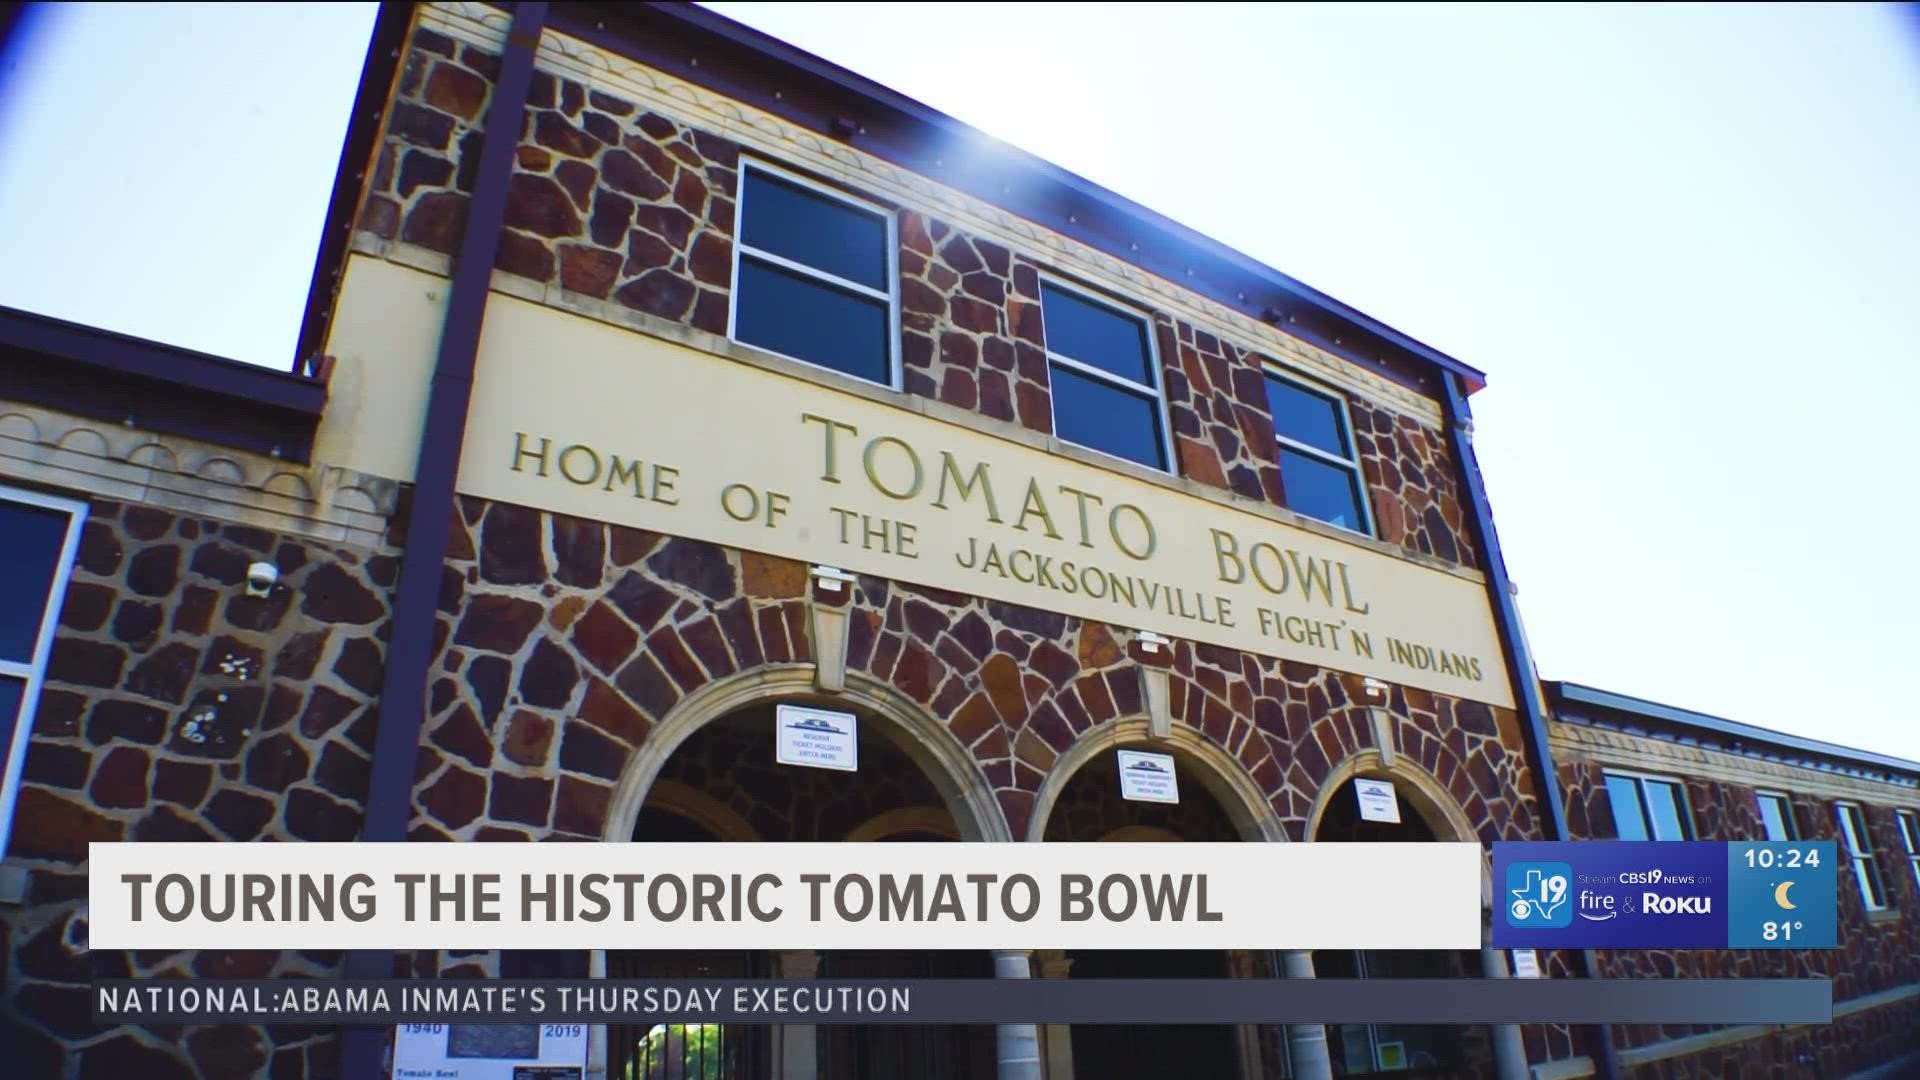 The Under the Lights Kickoff show is live from the Historic Tomato Bowl for their 2022 Homecoming game. Grace Taylor gives CBS19 a tour of the renovated stadium.